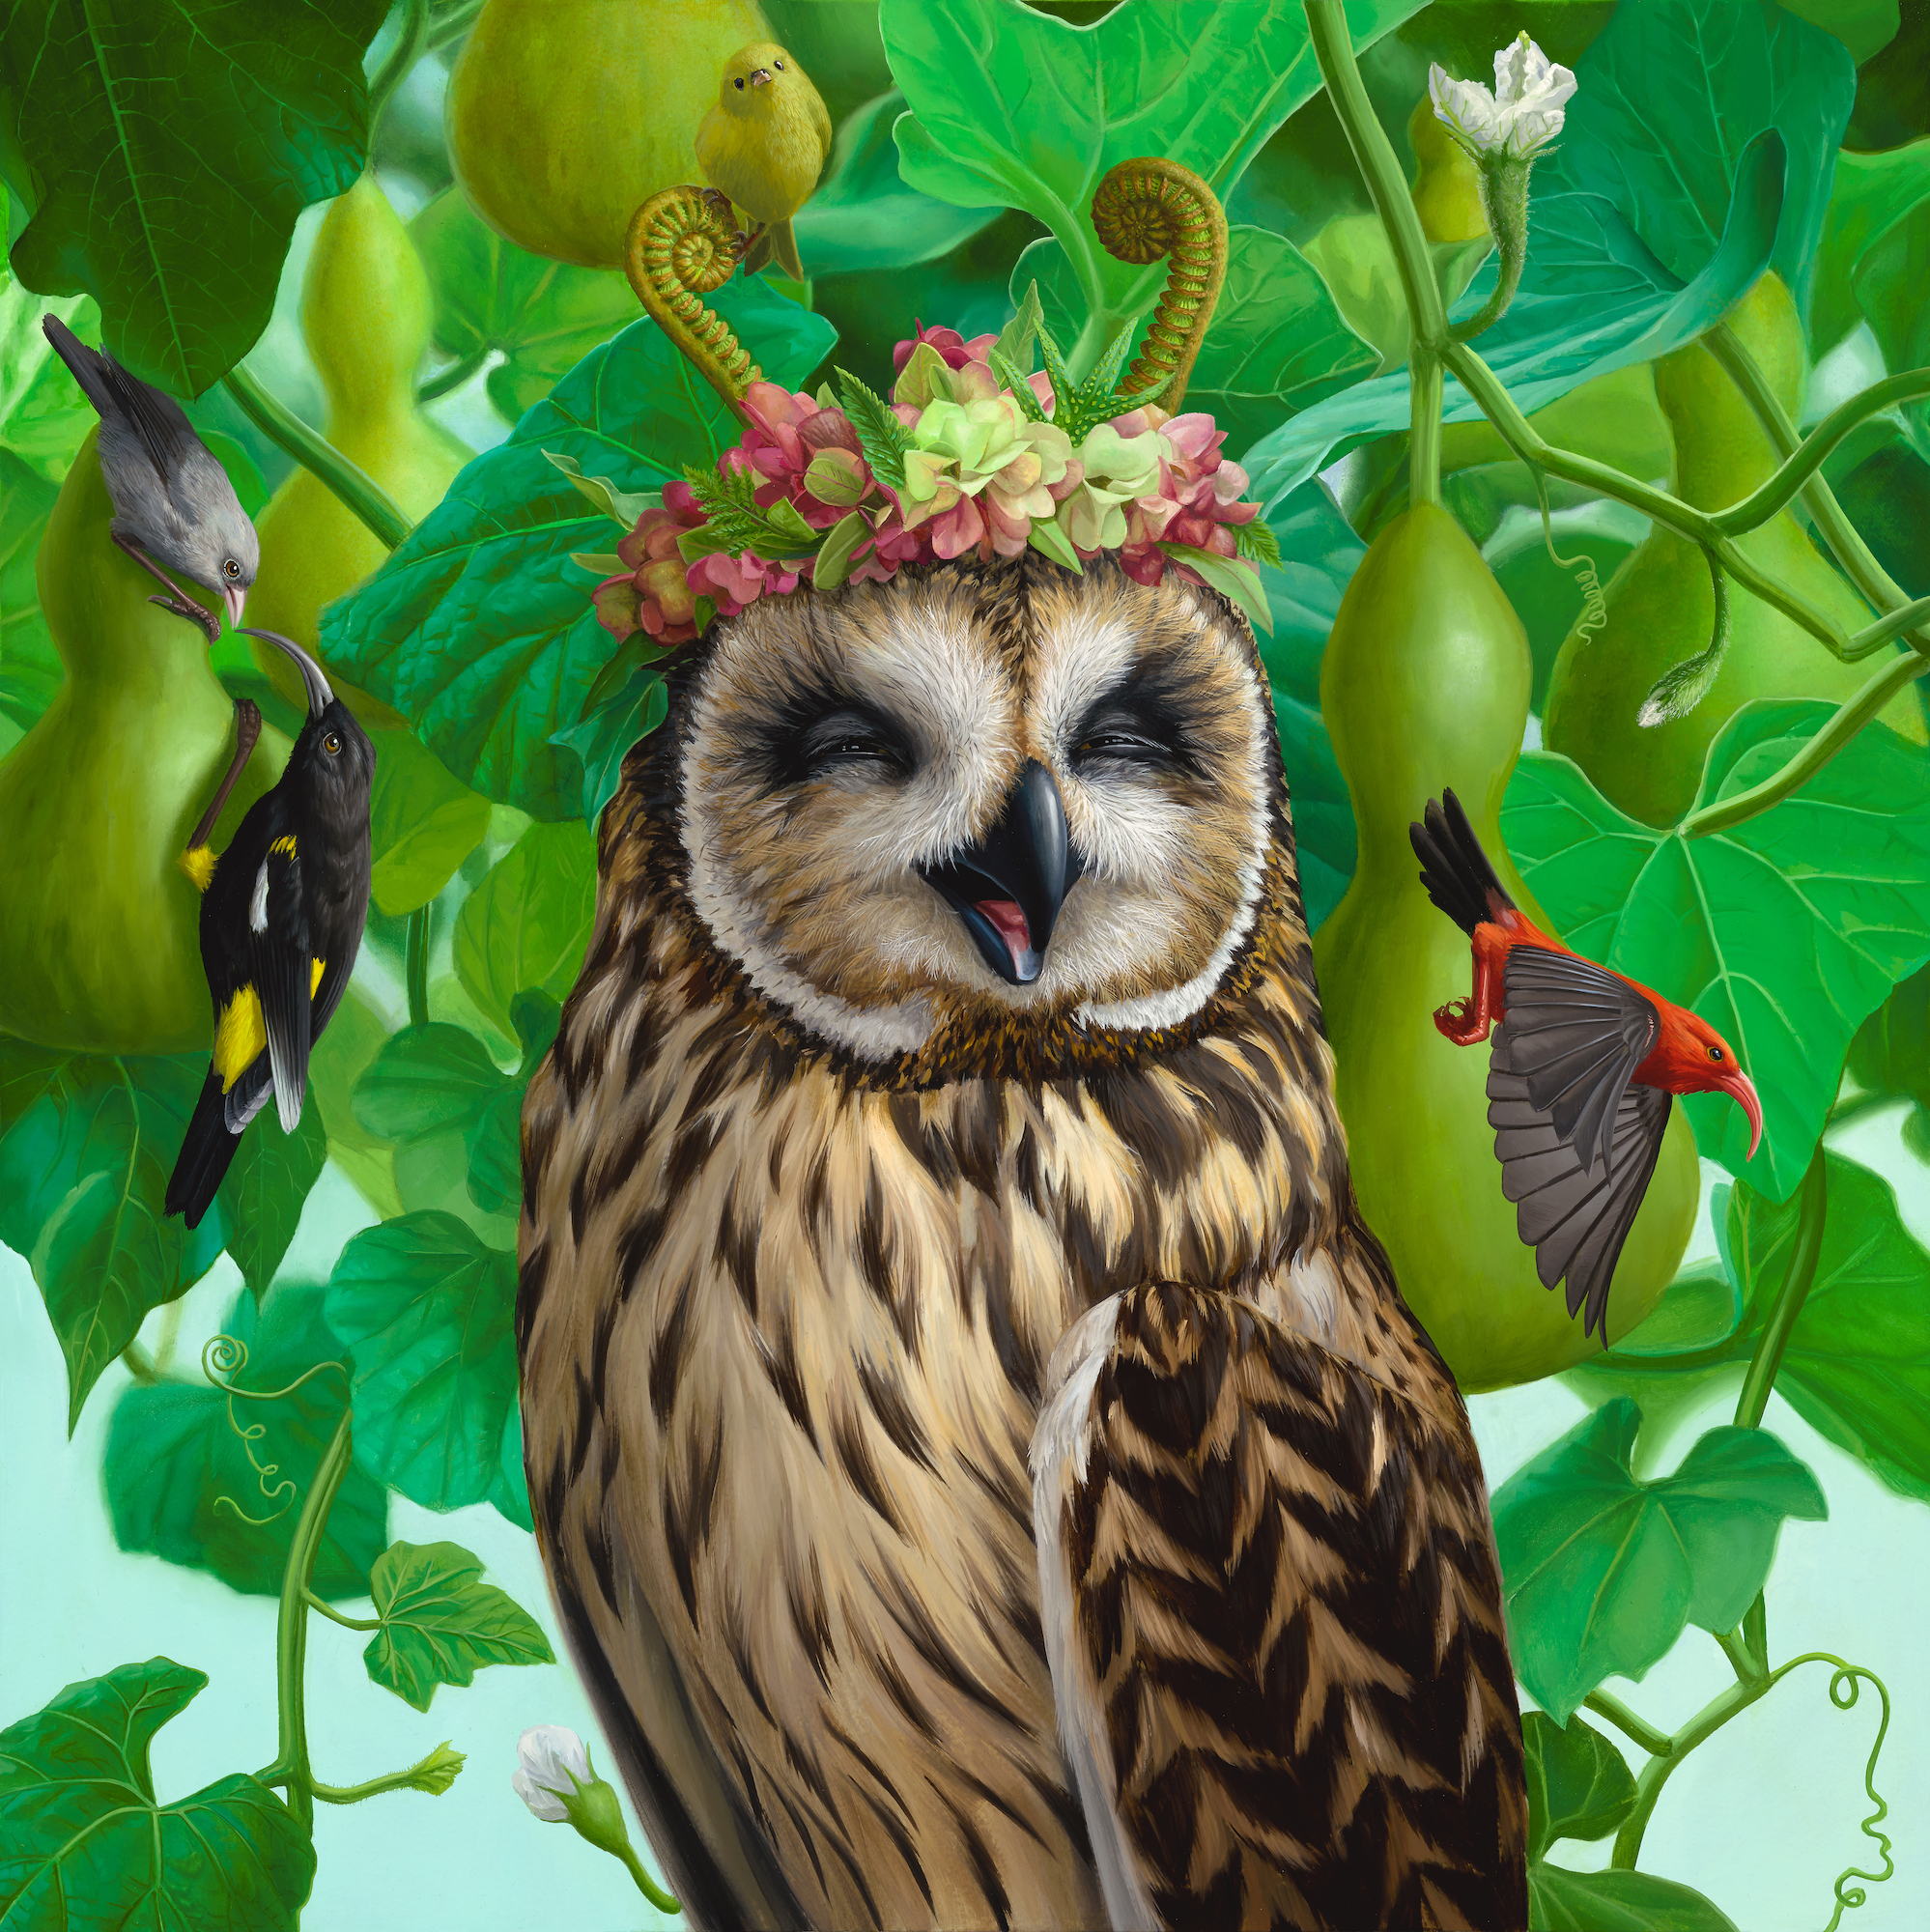 An oil painting of an owl with a wreath among some plants.